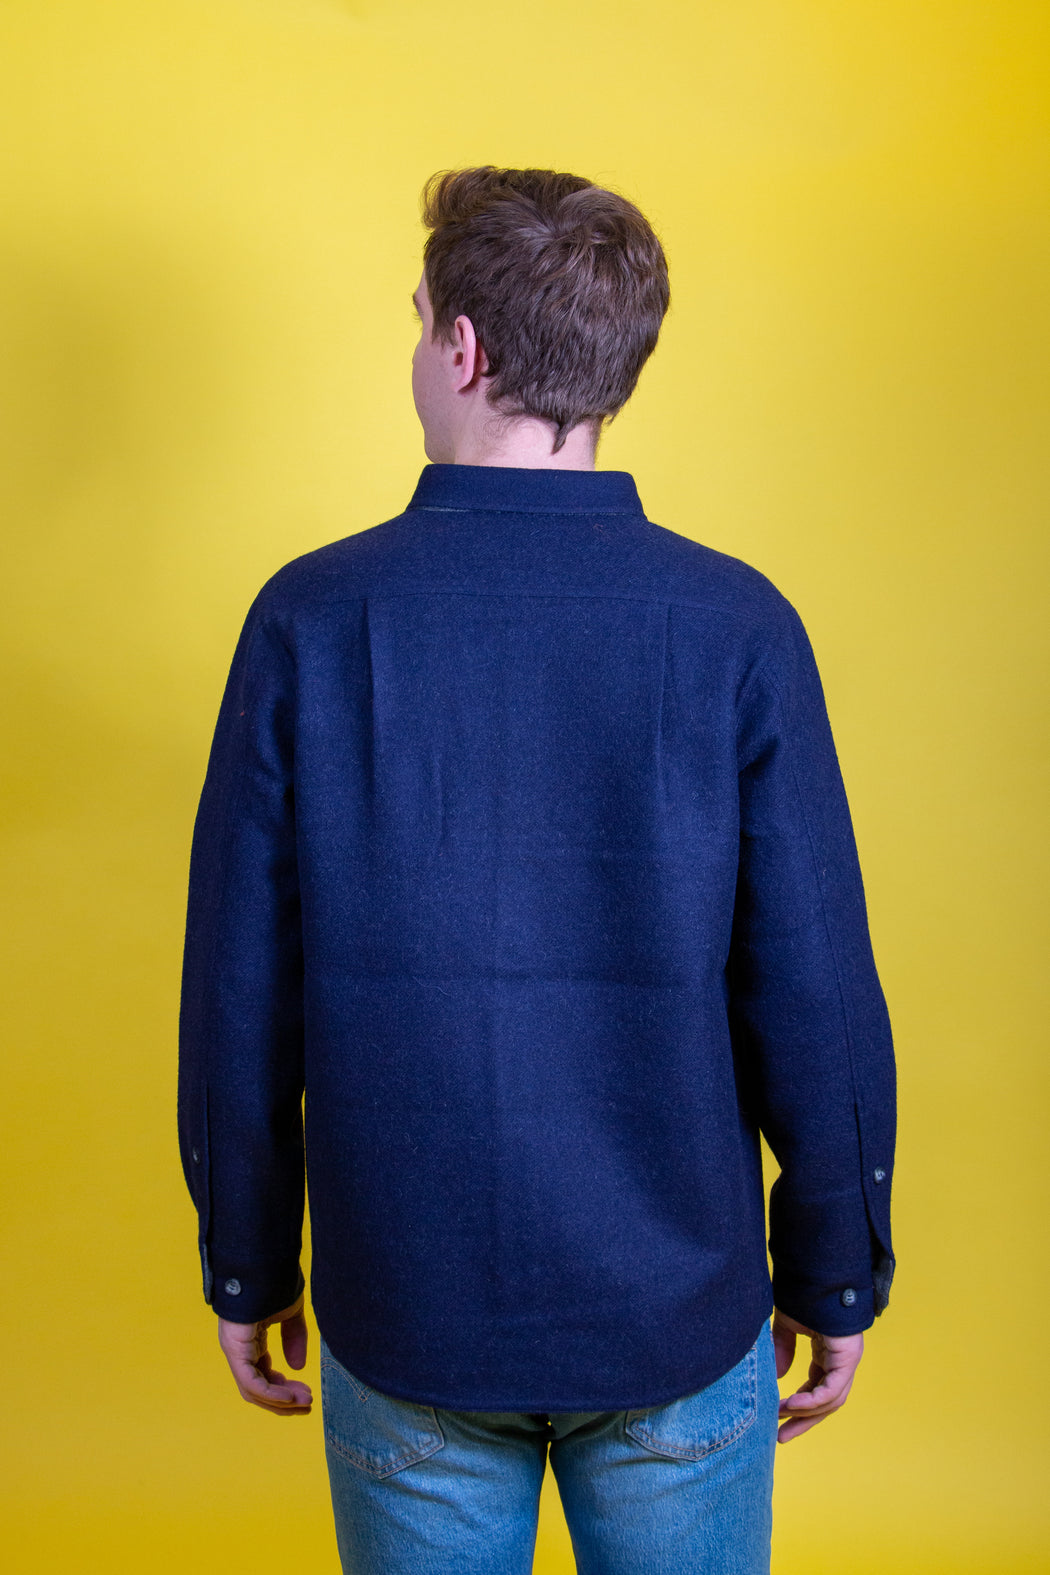 Back view of model wearing dark blue utilitarian CPO over shirt